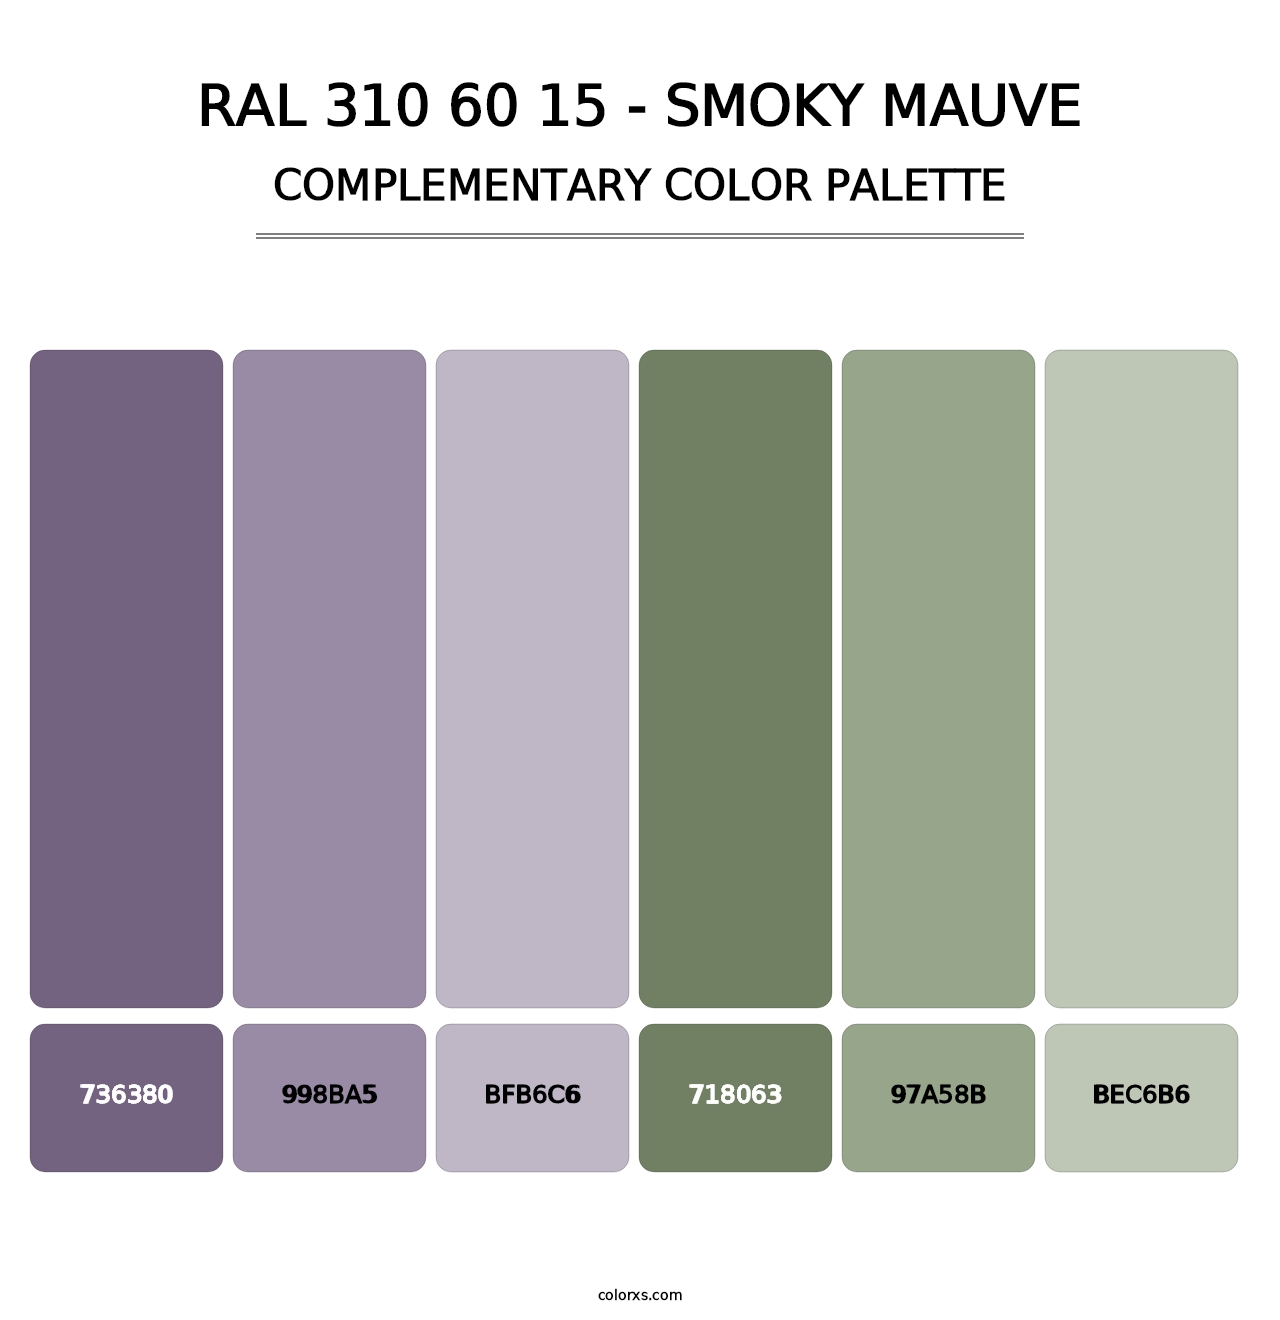 RAL 310 60 15 - Smoky Mauve - Complementary Color Palette